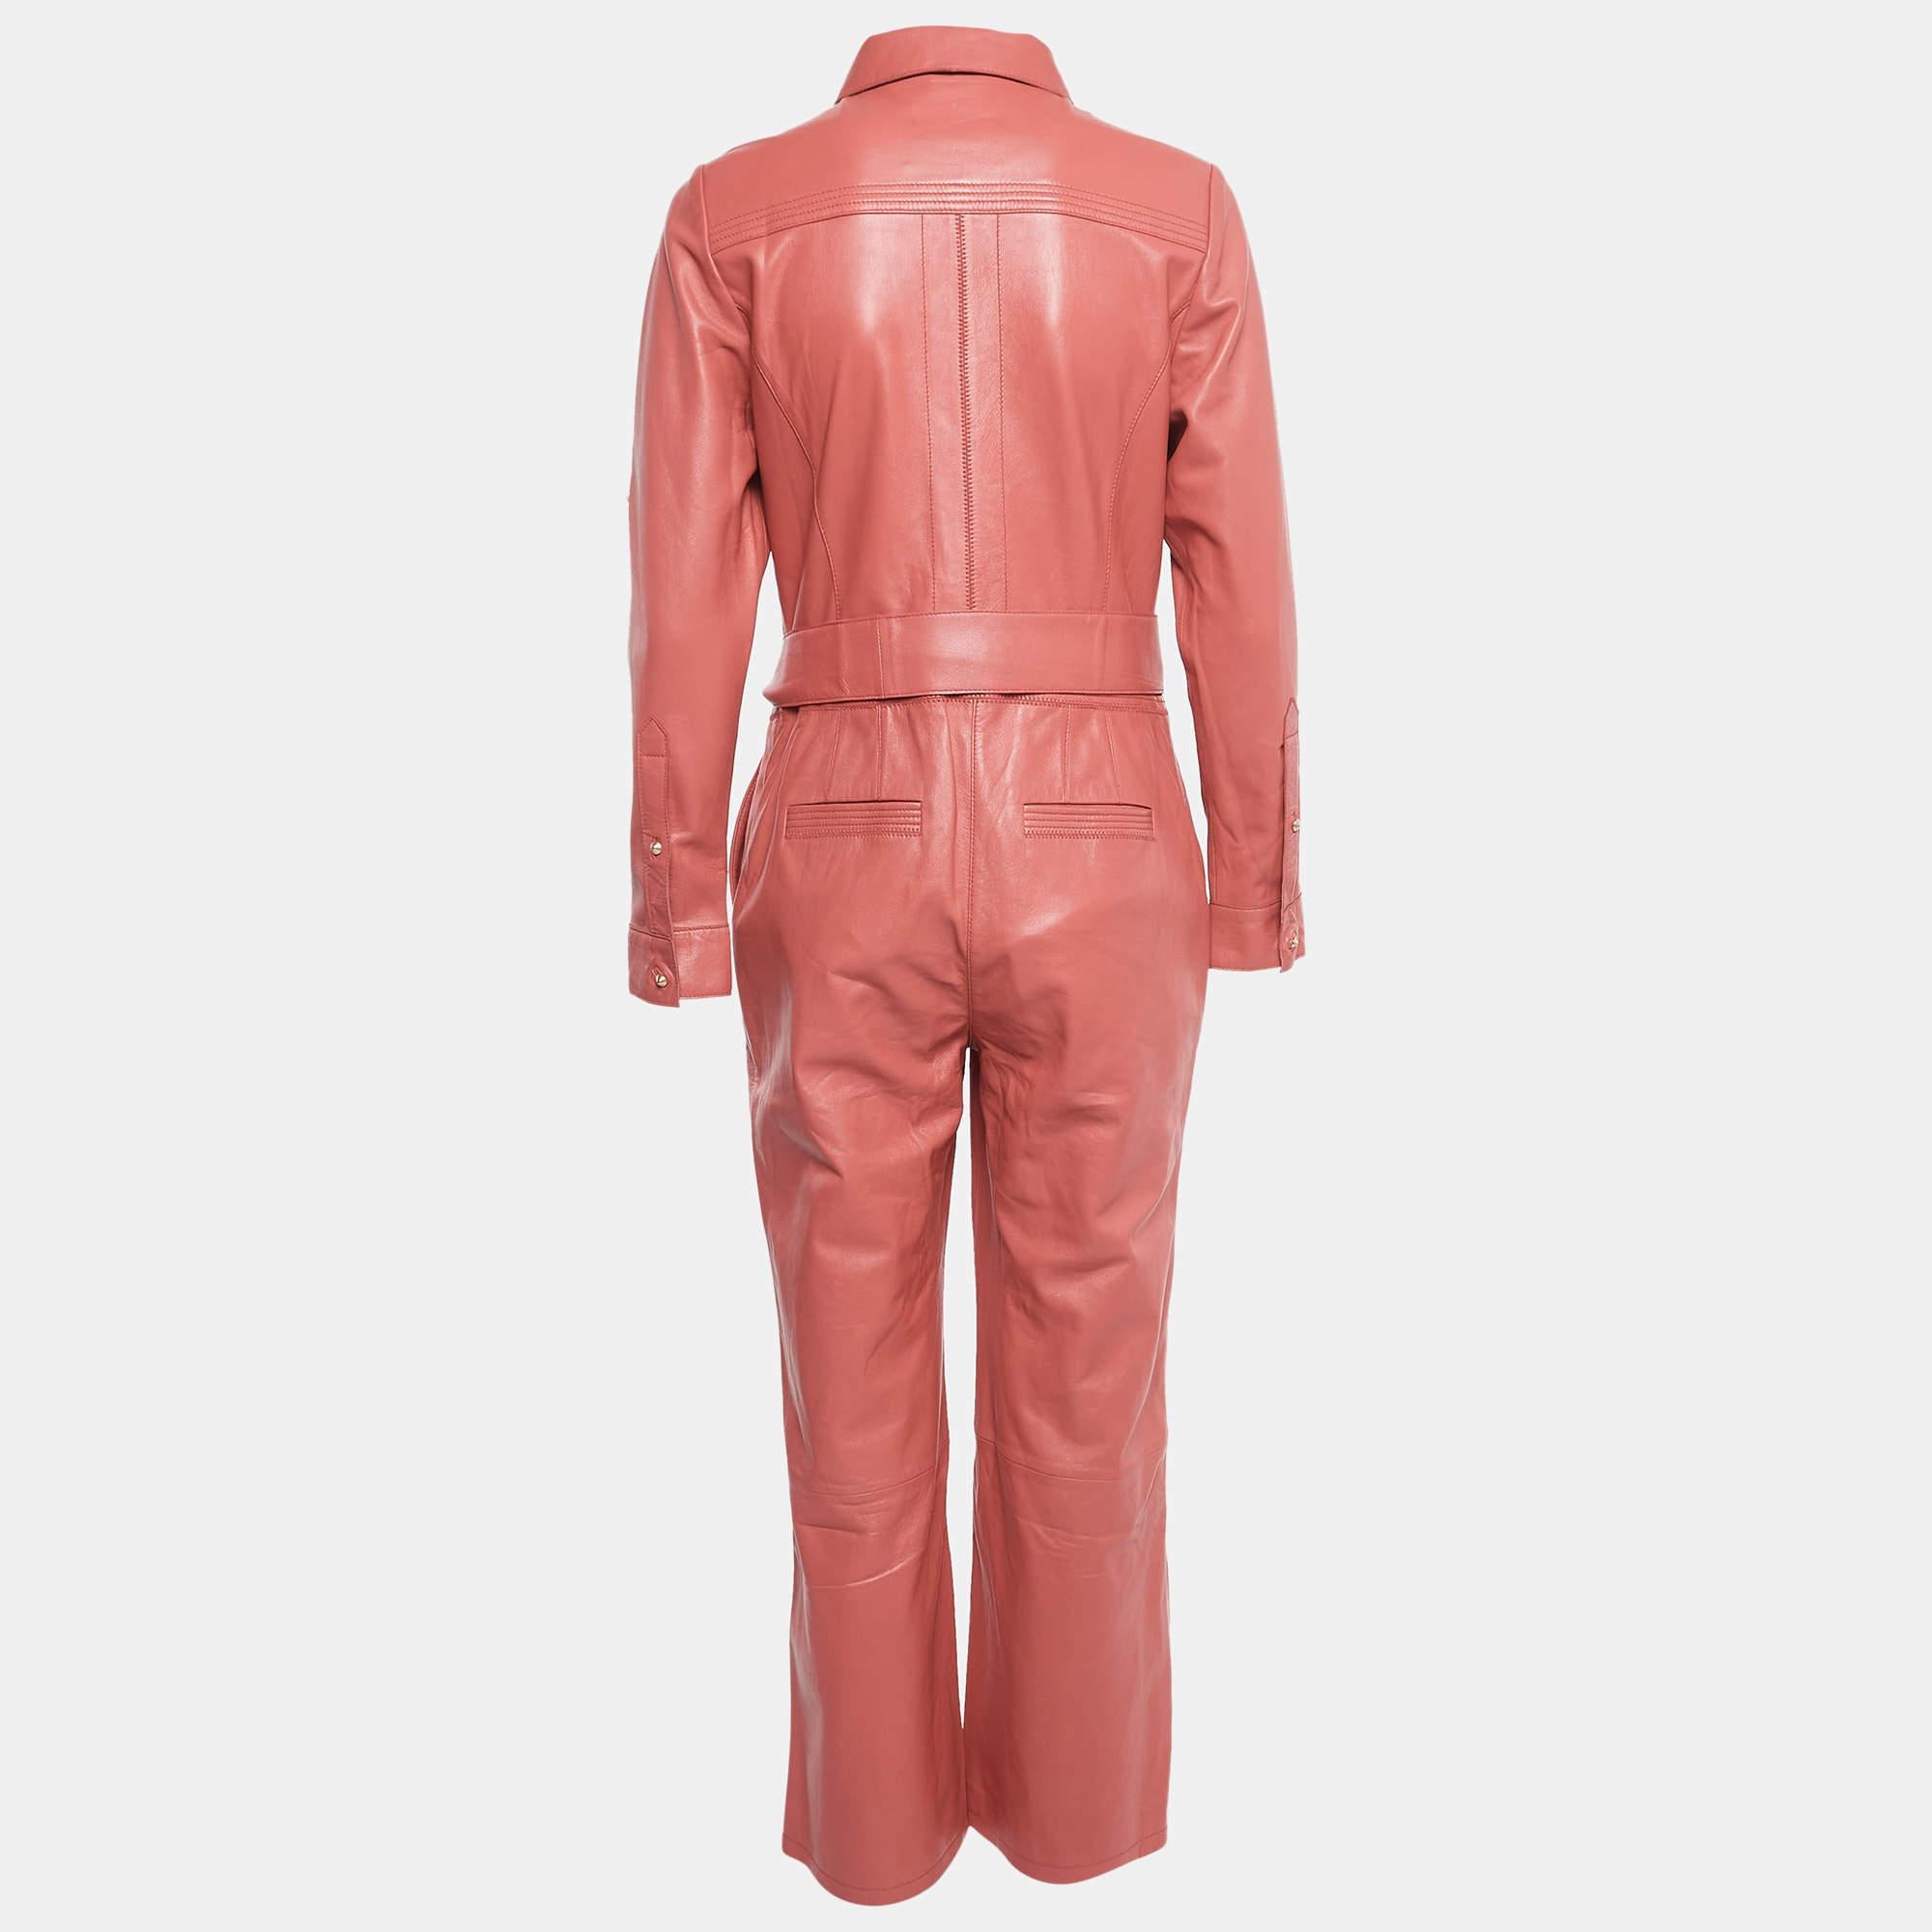 The Richards Radcliffe jumpsuit is a chic and bold fashion statement. Crafted from luxurious pink leather, it features a stylish cropped silhouette and a flattering belted waist. This jumpsuit seamlessly combines edgy and feminine elements for a